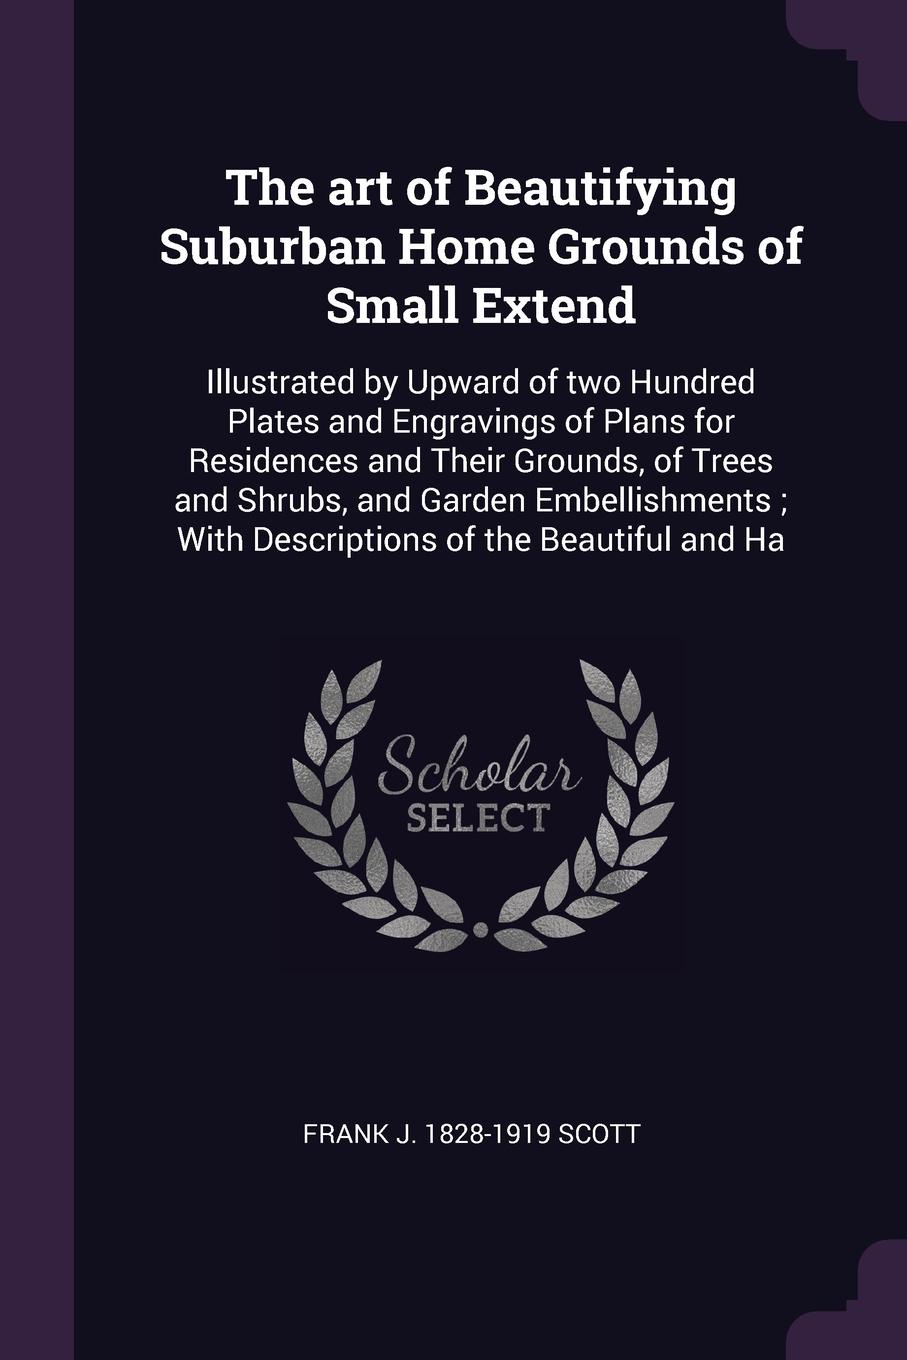 The art of Beautifying Suburban Home Grounds of Small Extend. Illustrated by Upward of two Hundred Plates and Engravings of Plans for Residences and Their Grounds, of Trees and Shrubs, and Garden Embellishments ; With Descriptions of the Beautiful...